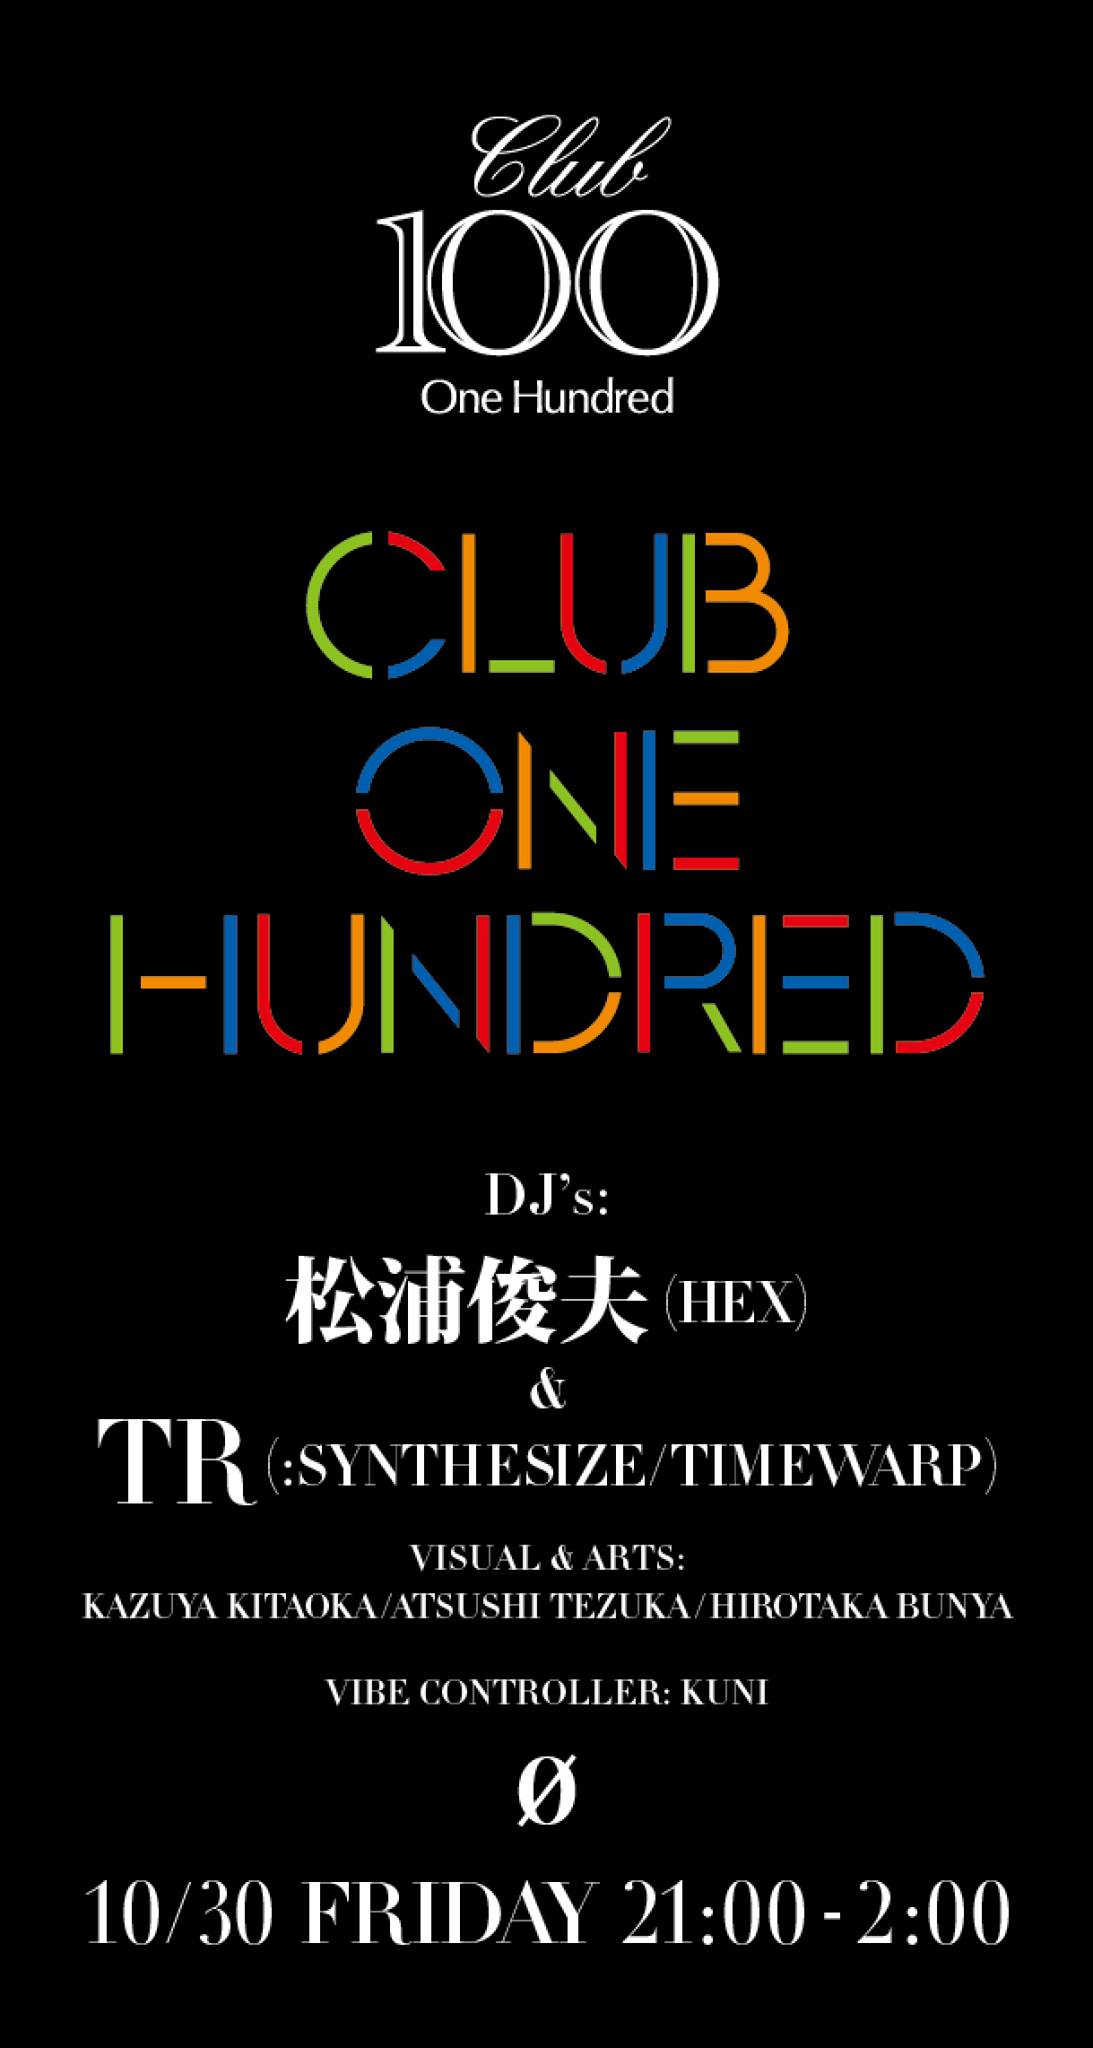 CLUB 100 (One Hundred)